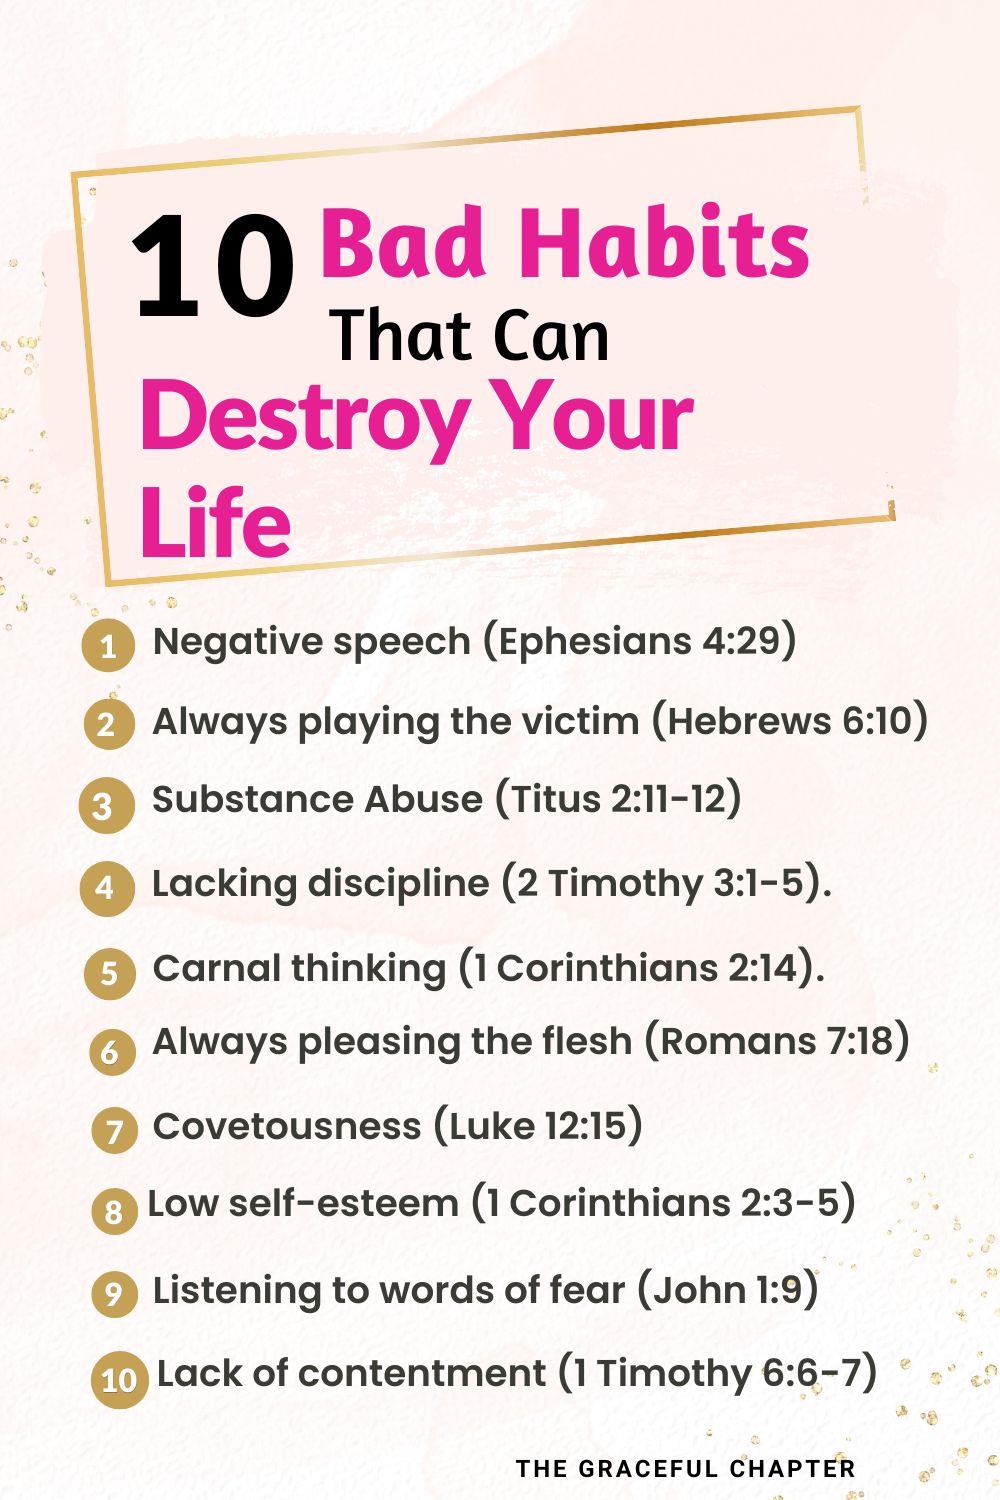 10 Bad Habits That Can Destroy Your Life